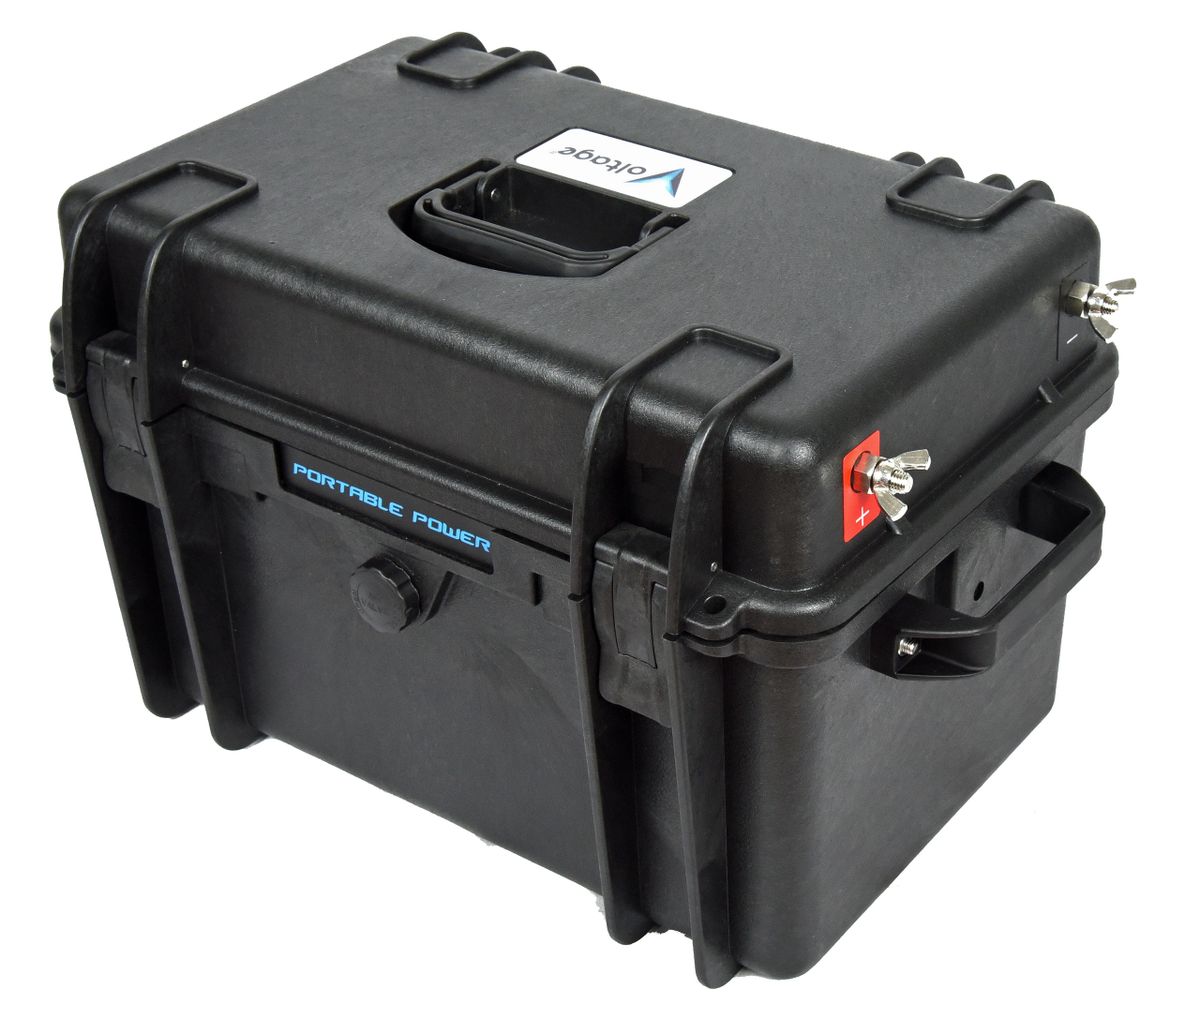 V105MR Waterproof Power Center battery enclosure for Group 24, 27 and 31  batteries